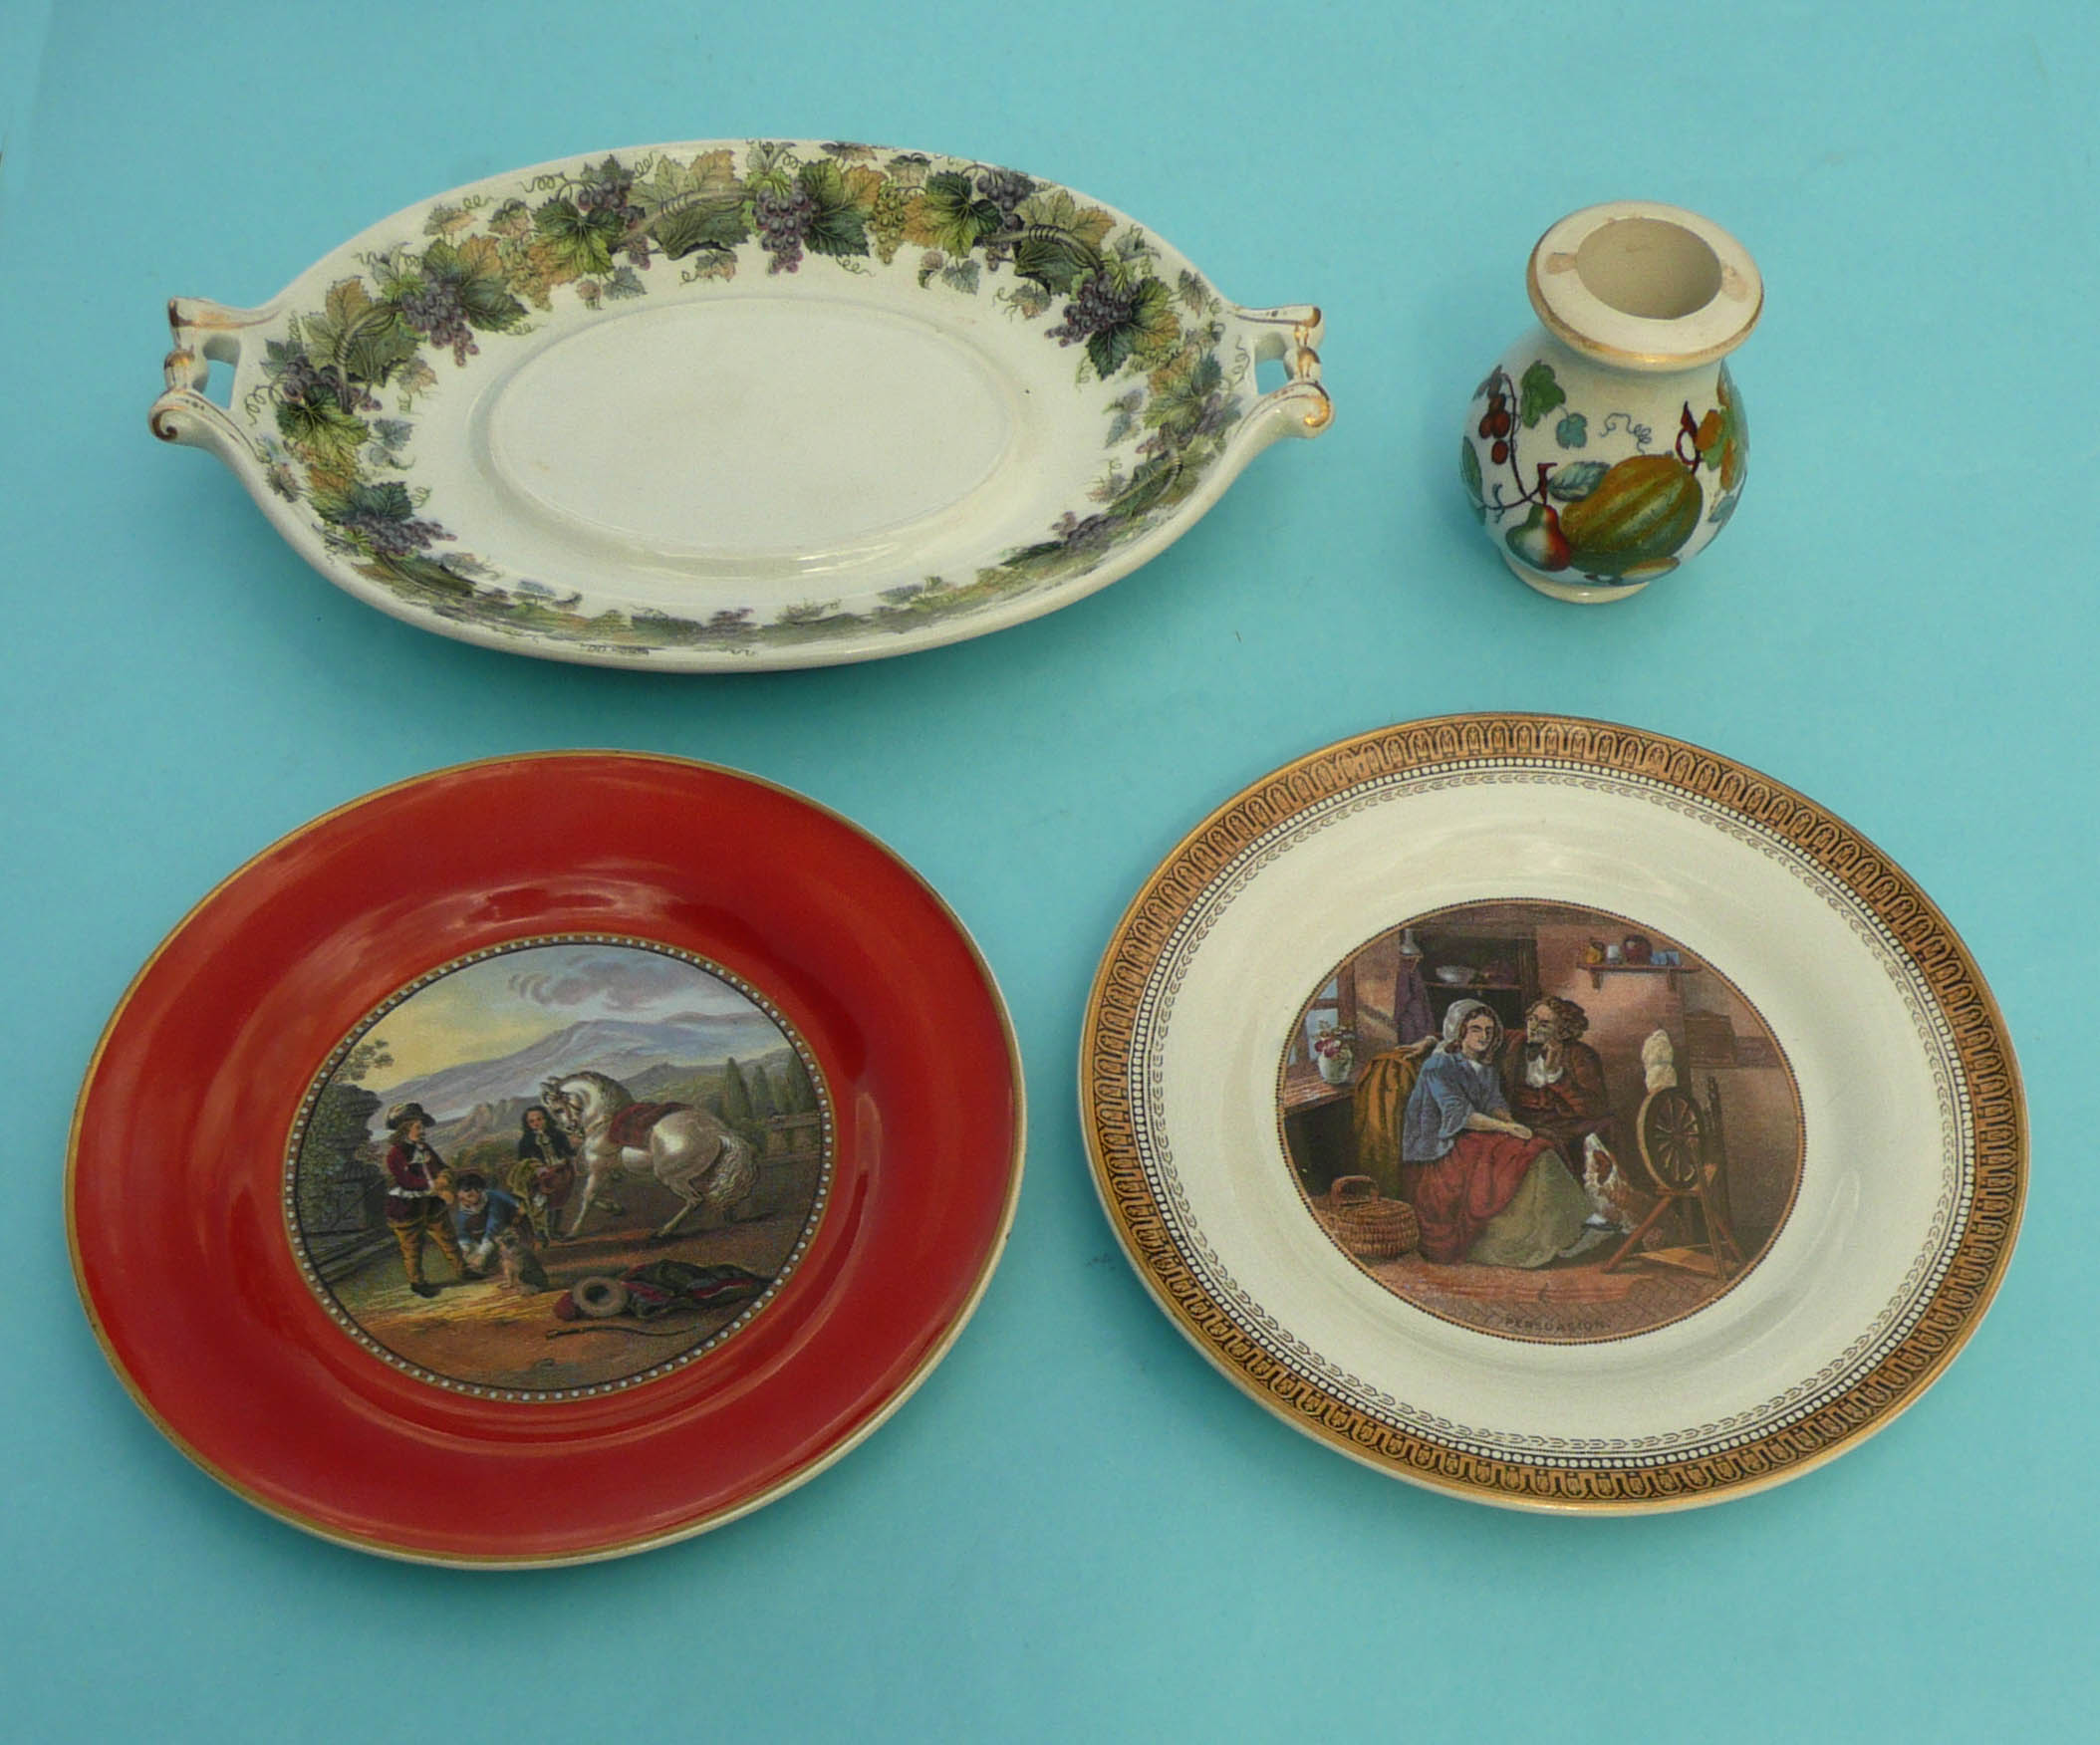 Two side plates, an oval stand with fruiting vine border and a small baluster jar with fruits and